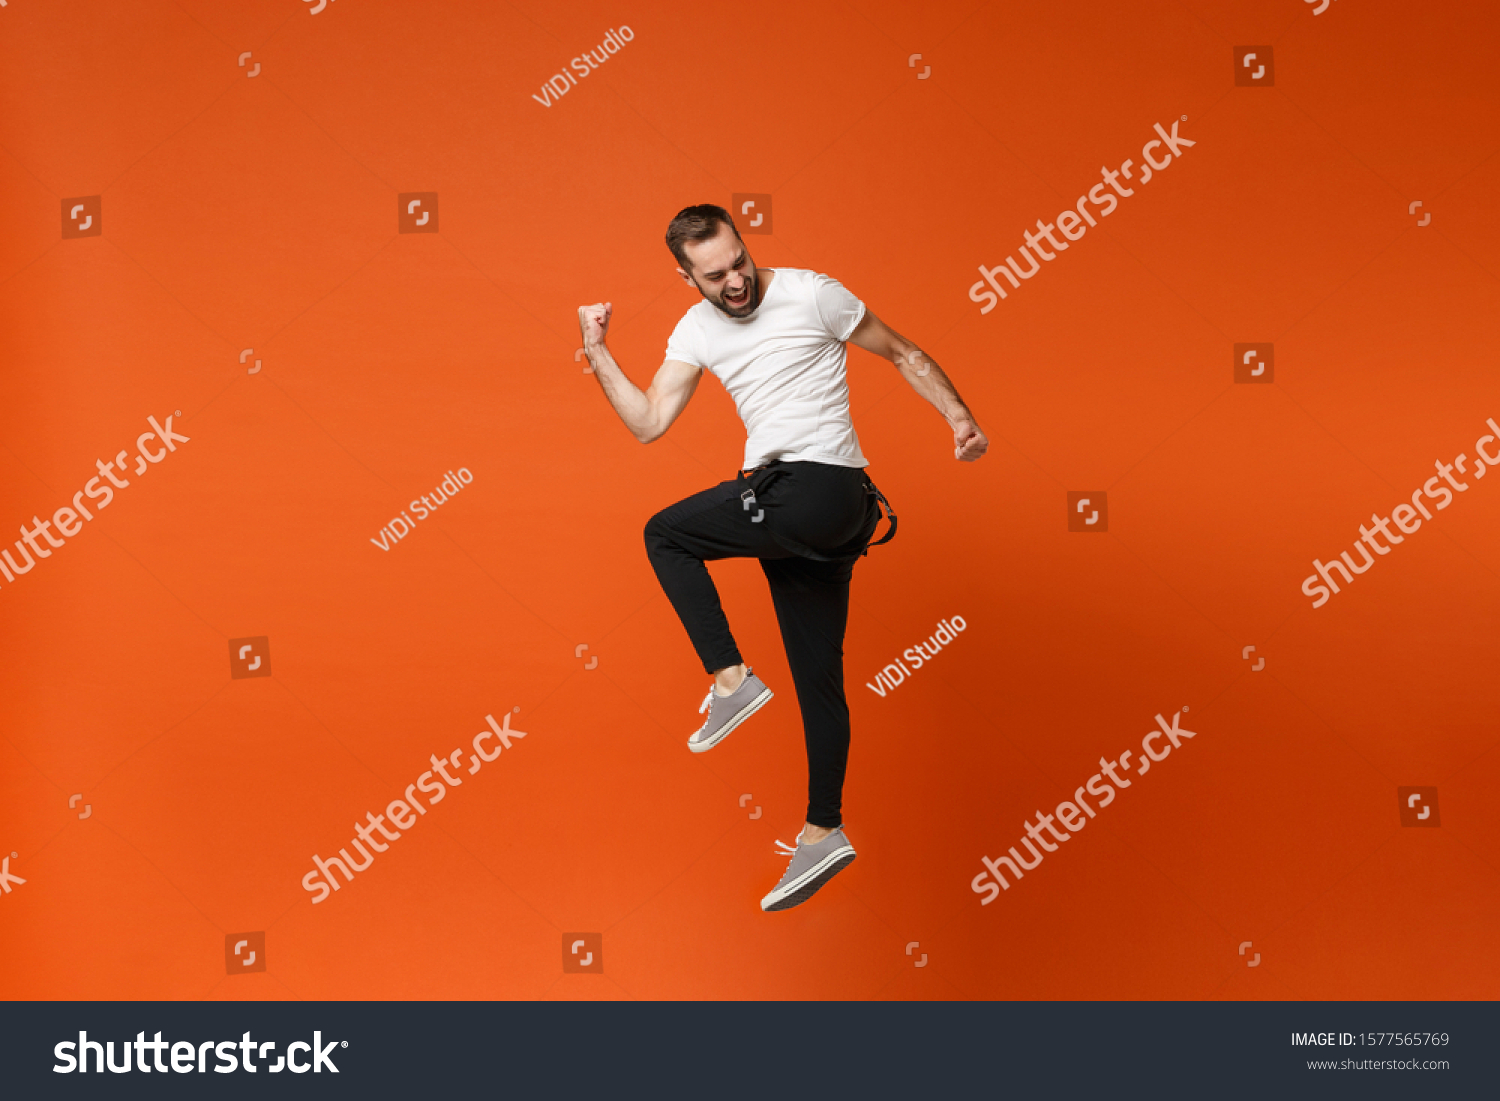 Cheerful young man in casual white t-shirt posing isolated on bright orange wall background studio portrait. People lifestyle concept. Mock up copy space. Having fun, jumping, doing winner gesture #1577565769